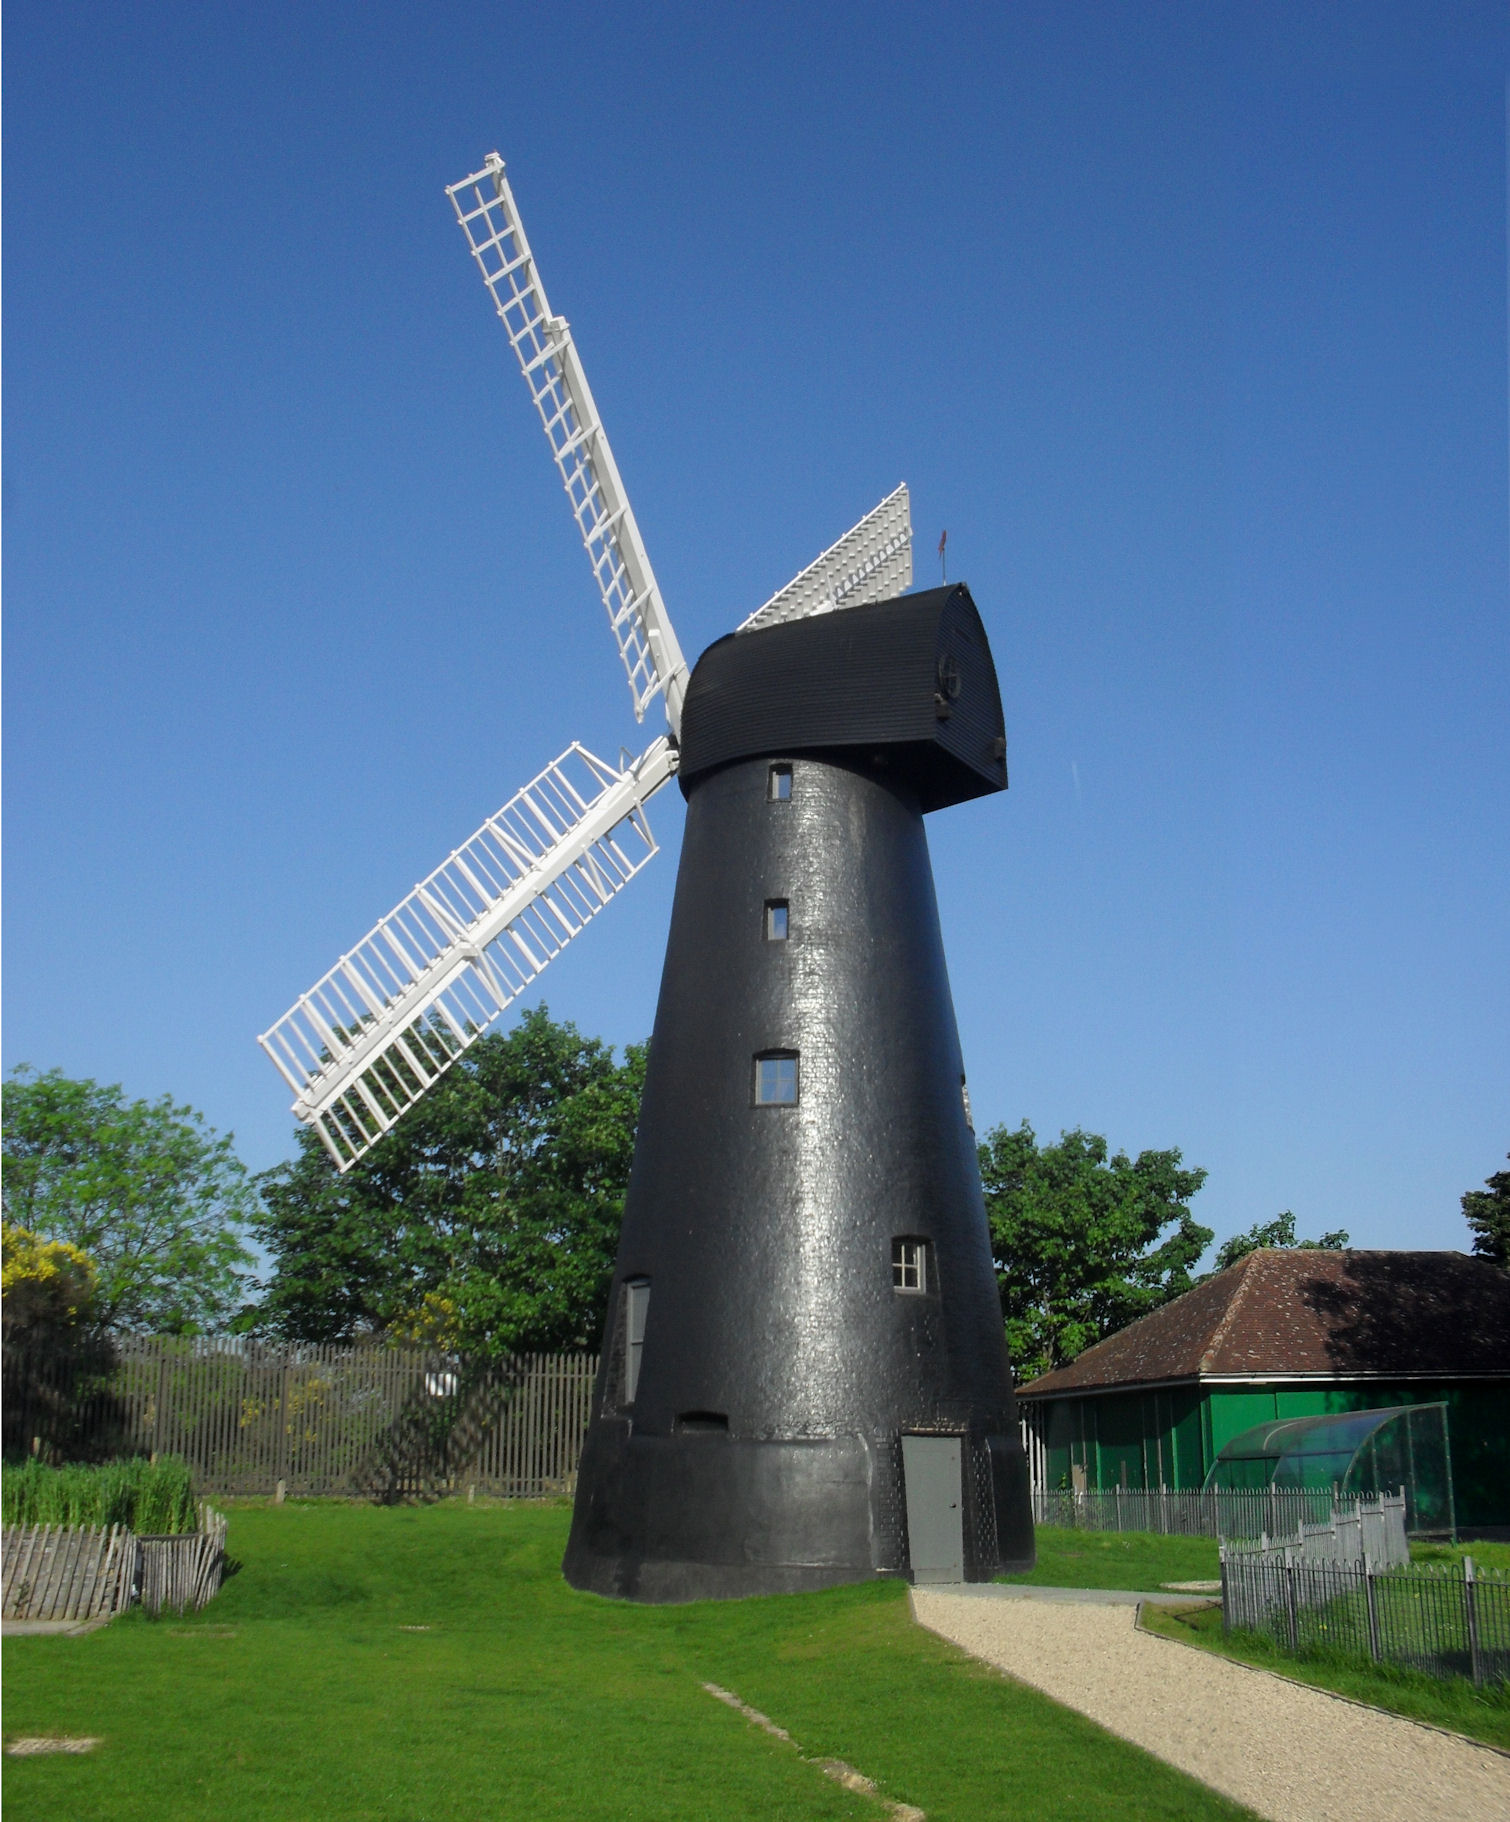 Featured image for “The Windmill at Brixton”